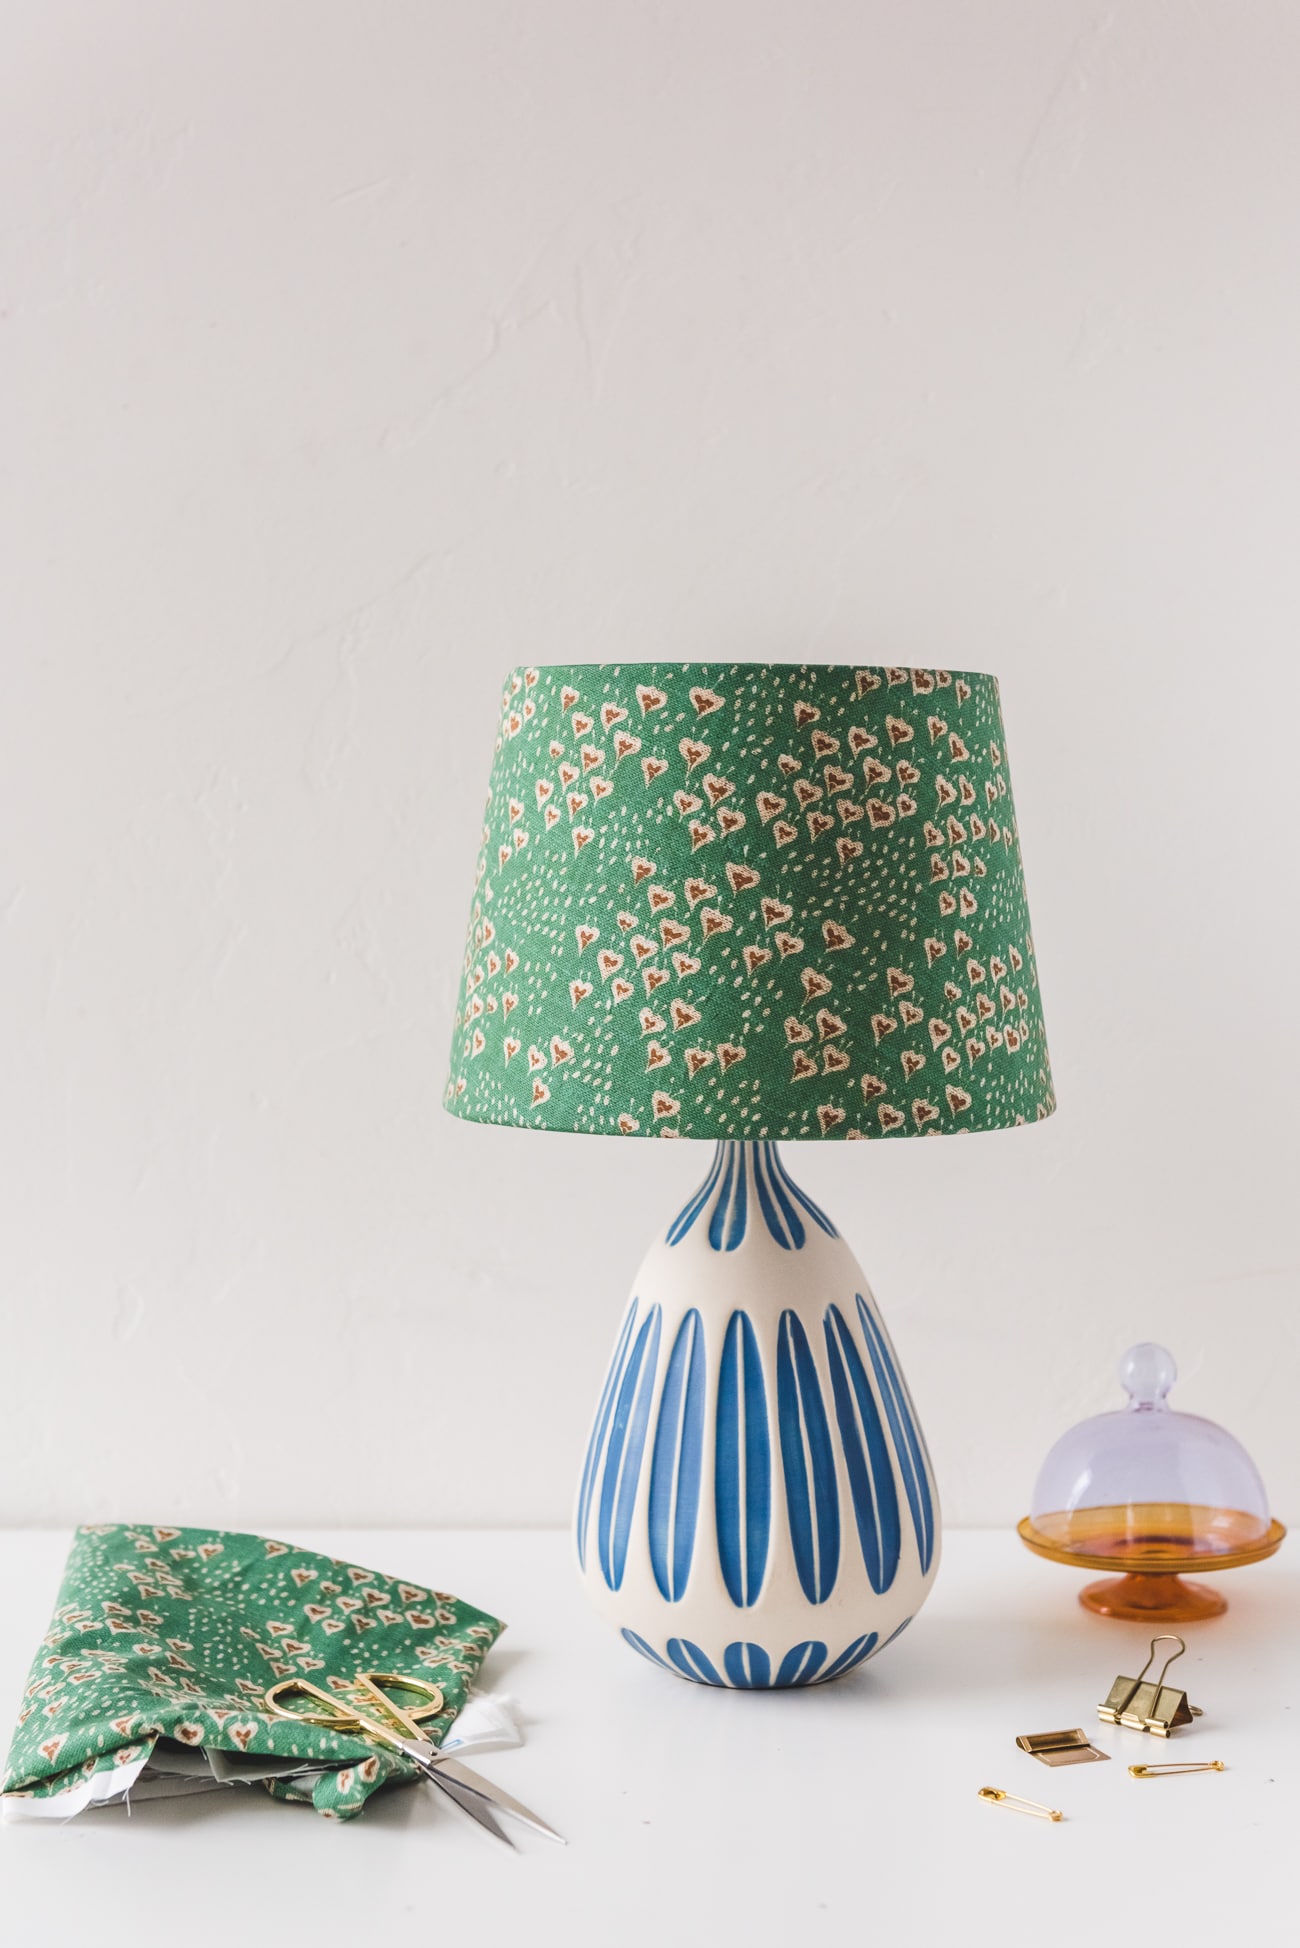 Lamp customized with spoonflower fabric from Holli Zollinger against a wildflower covered wall.